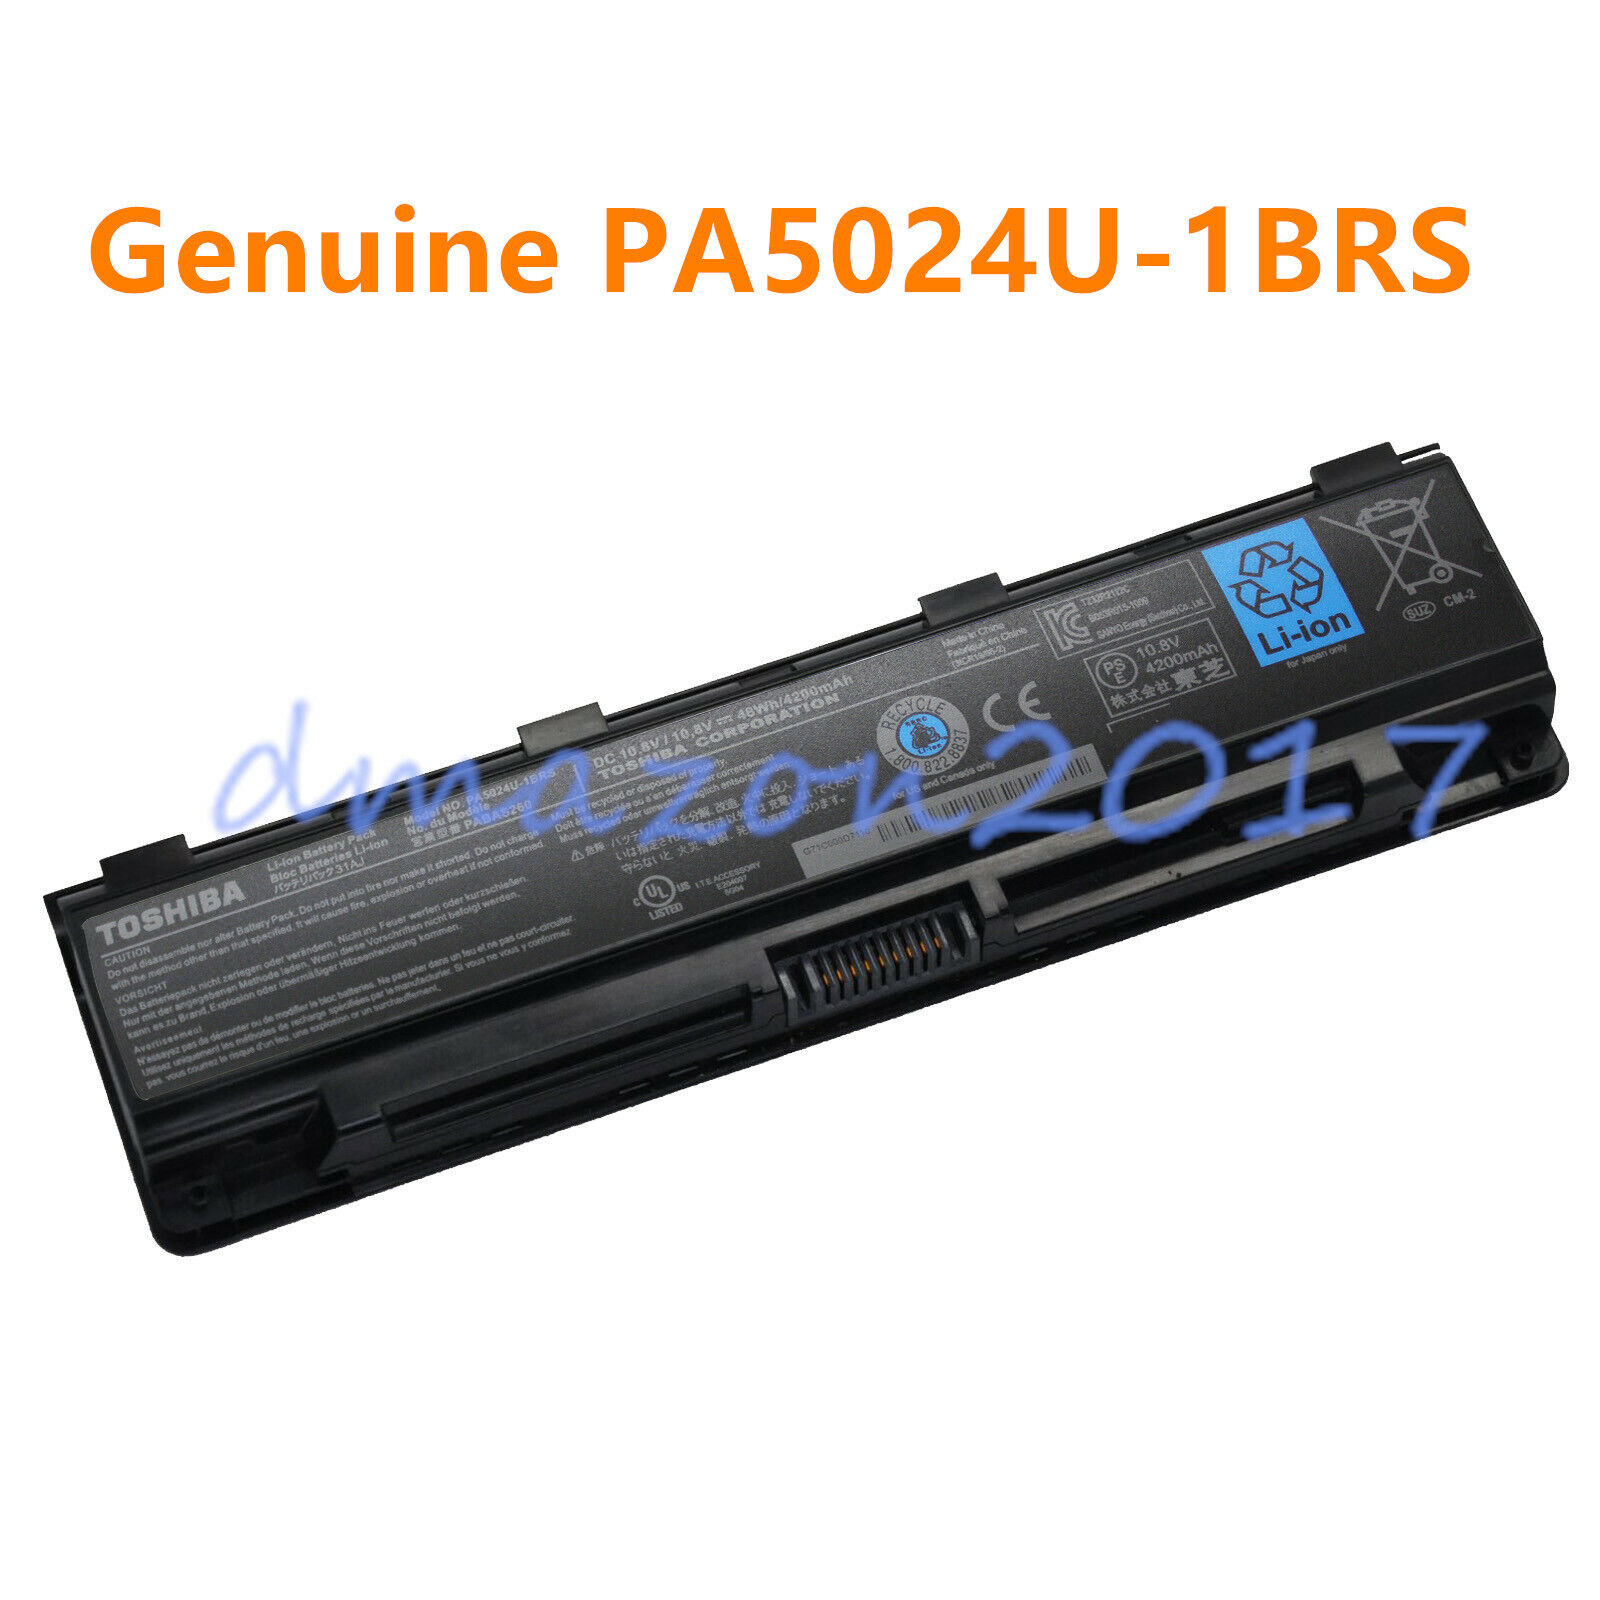 Genuine PA5024U-1BRS Battery For Toshiba Satellite C850 PABAS260 C55T C855D 48WH